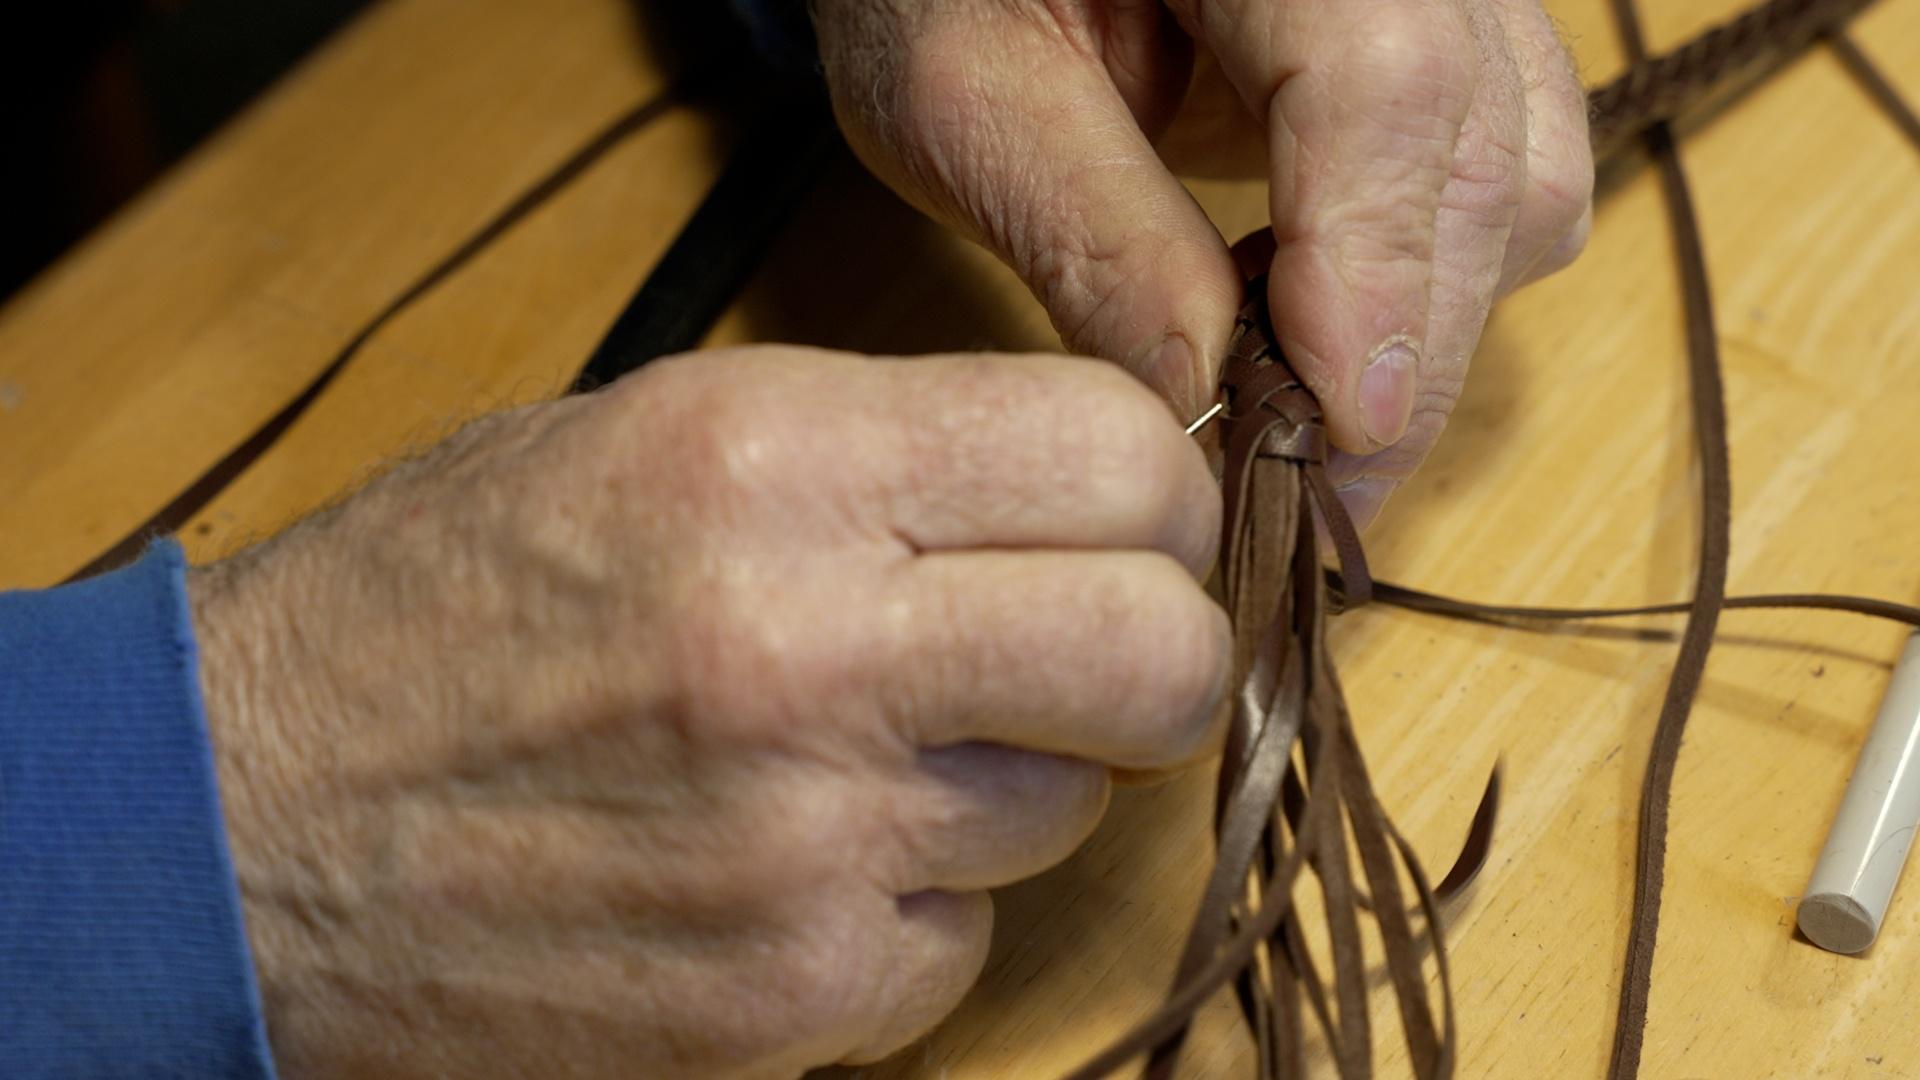 A closeup of “pineapple knots” being made by Mike “Hooey” Storch of Donnelly, Idaho. The knots are made by braiding two “Turk’s Head” knots together.